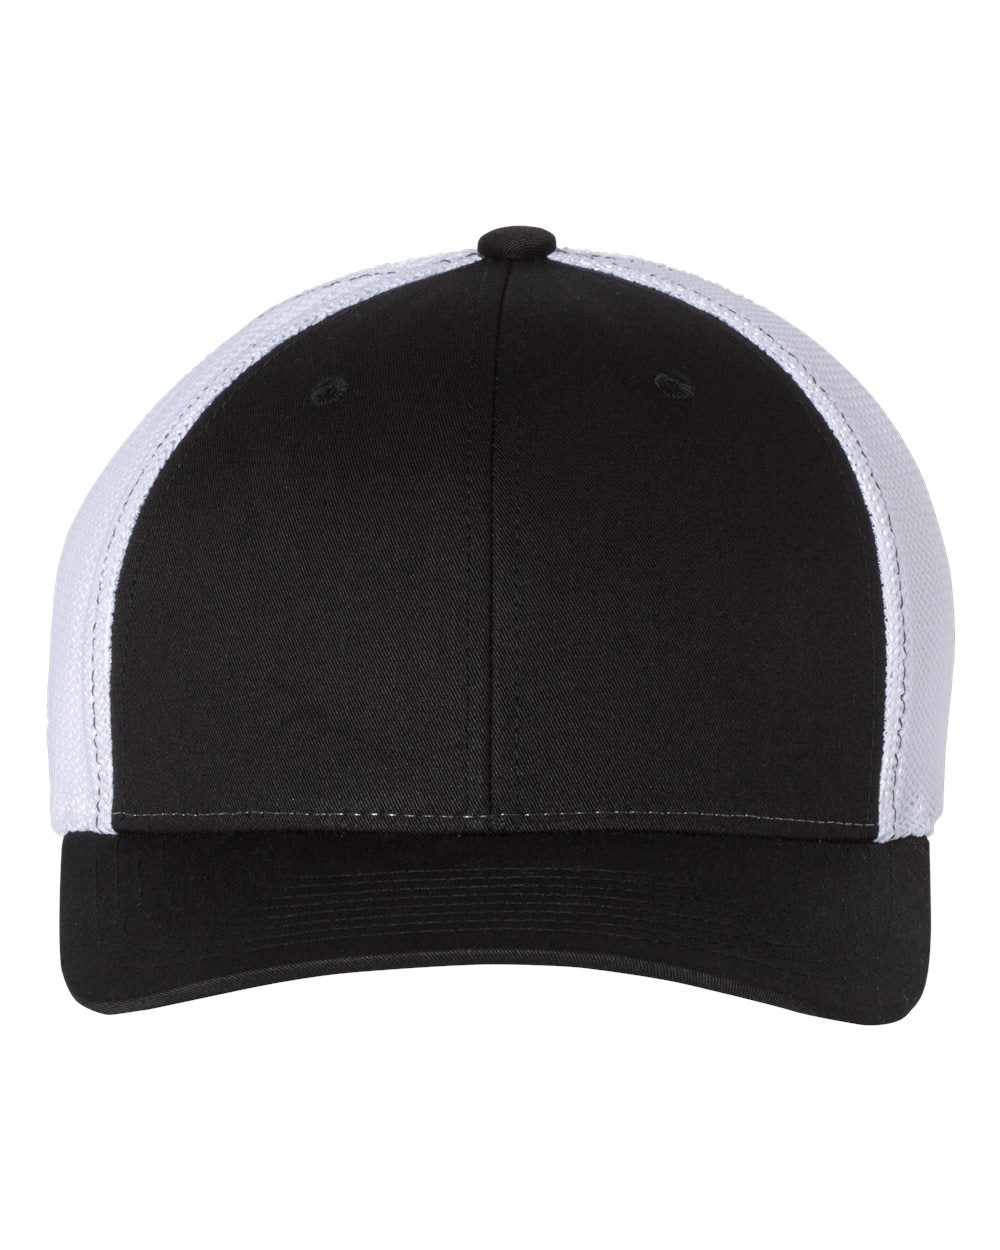 Richardson -110 Fitted Trucker with R-Flex Cap